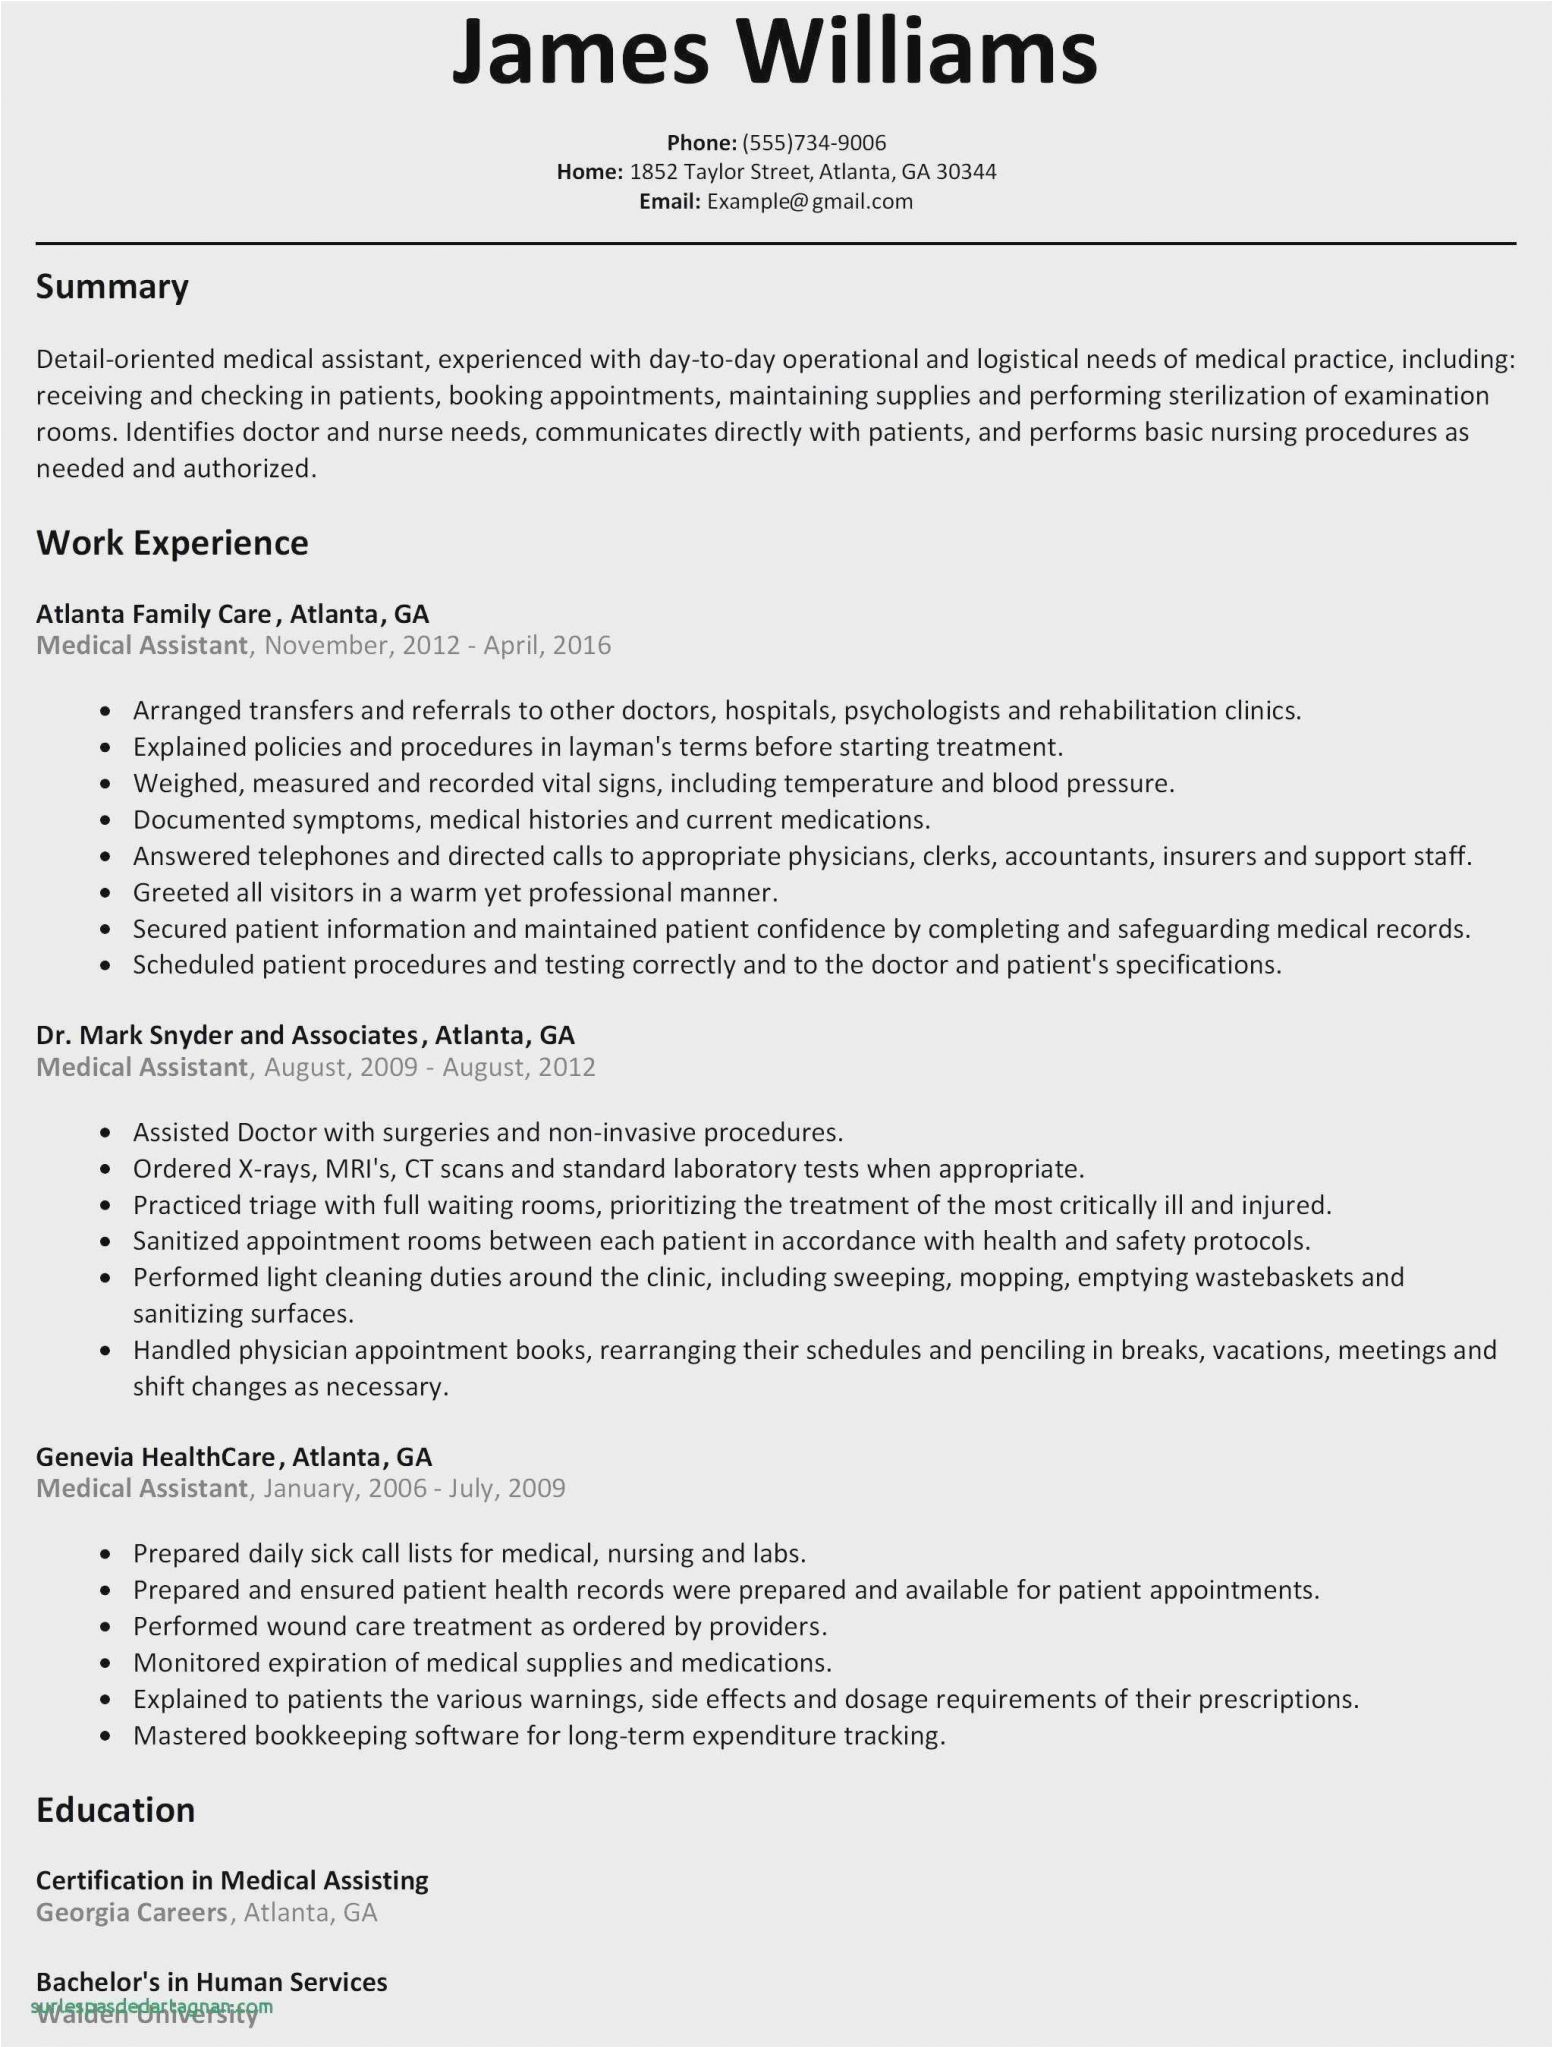 Resume Sample for Cna with No Experience Cna Resume Examples with No Experience Free Collection 52